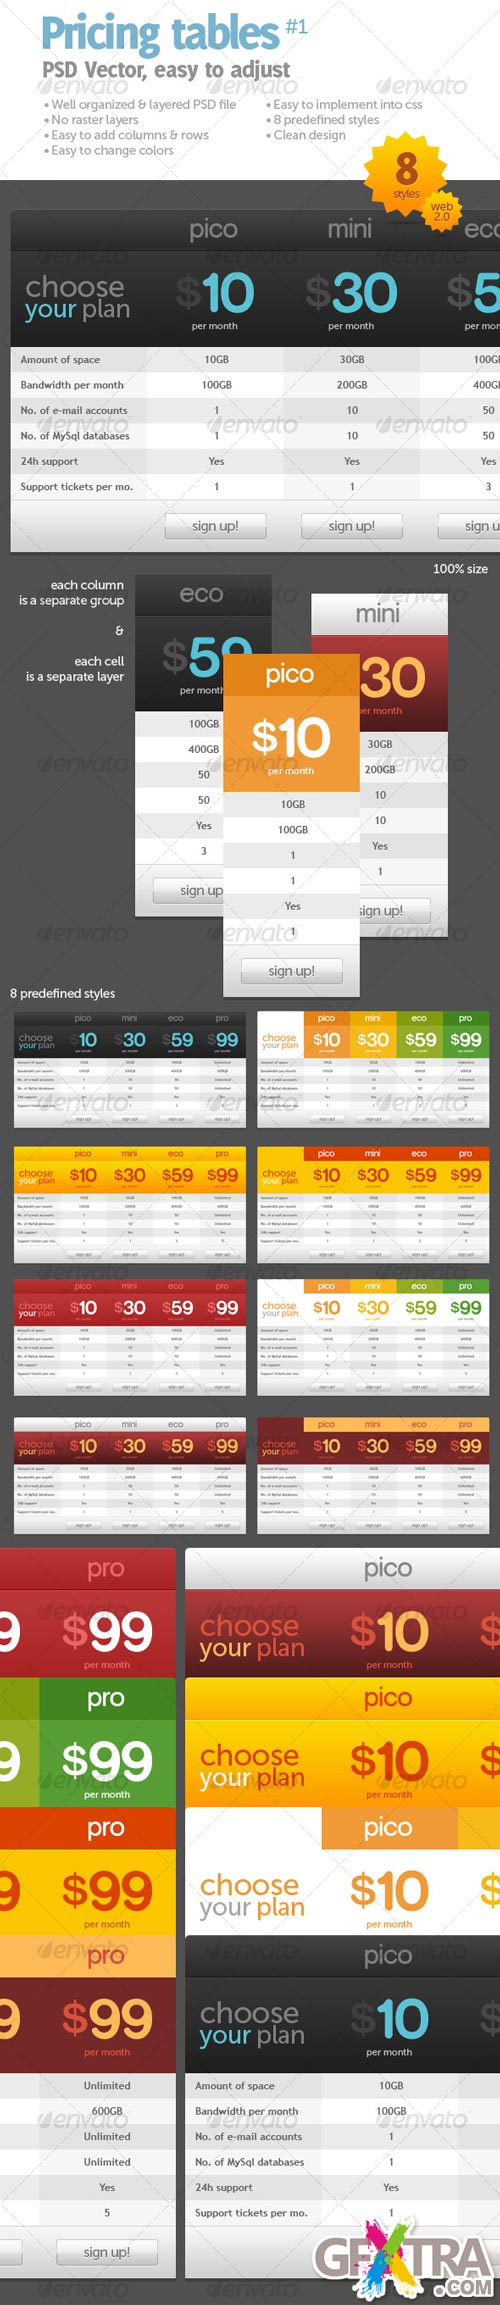 Pricing Table#1 - GraphicRiver - REUPLOADED!